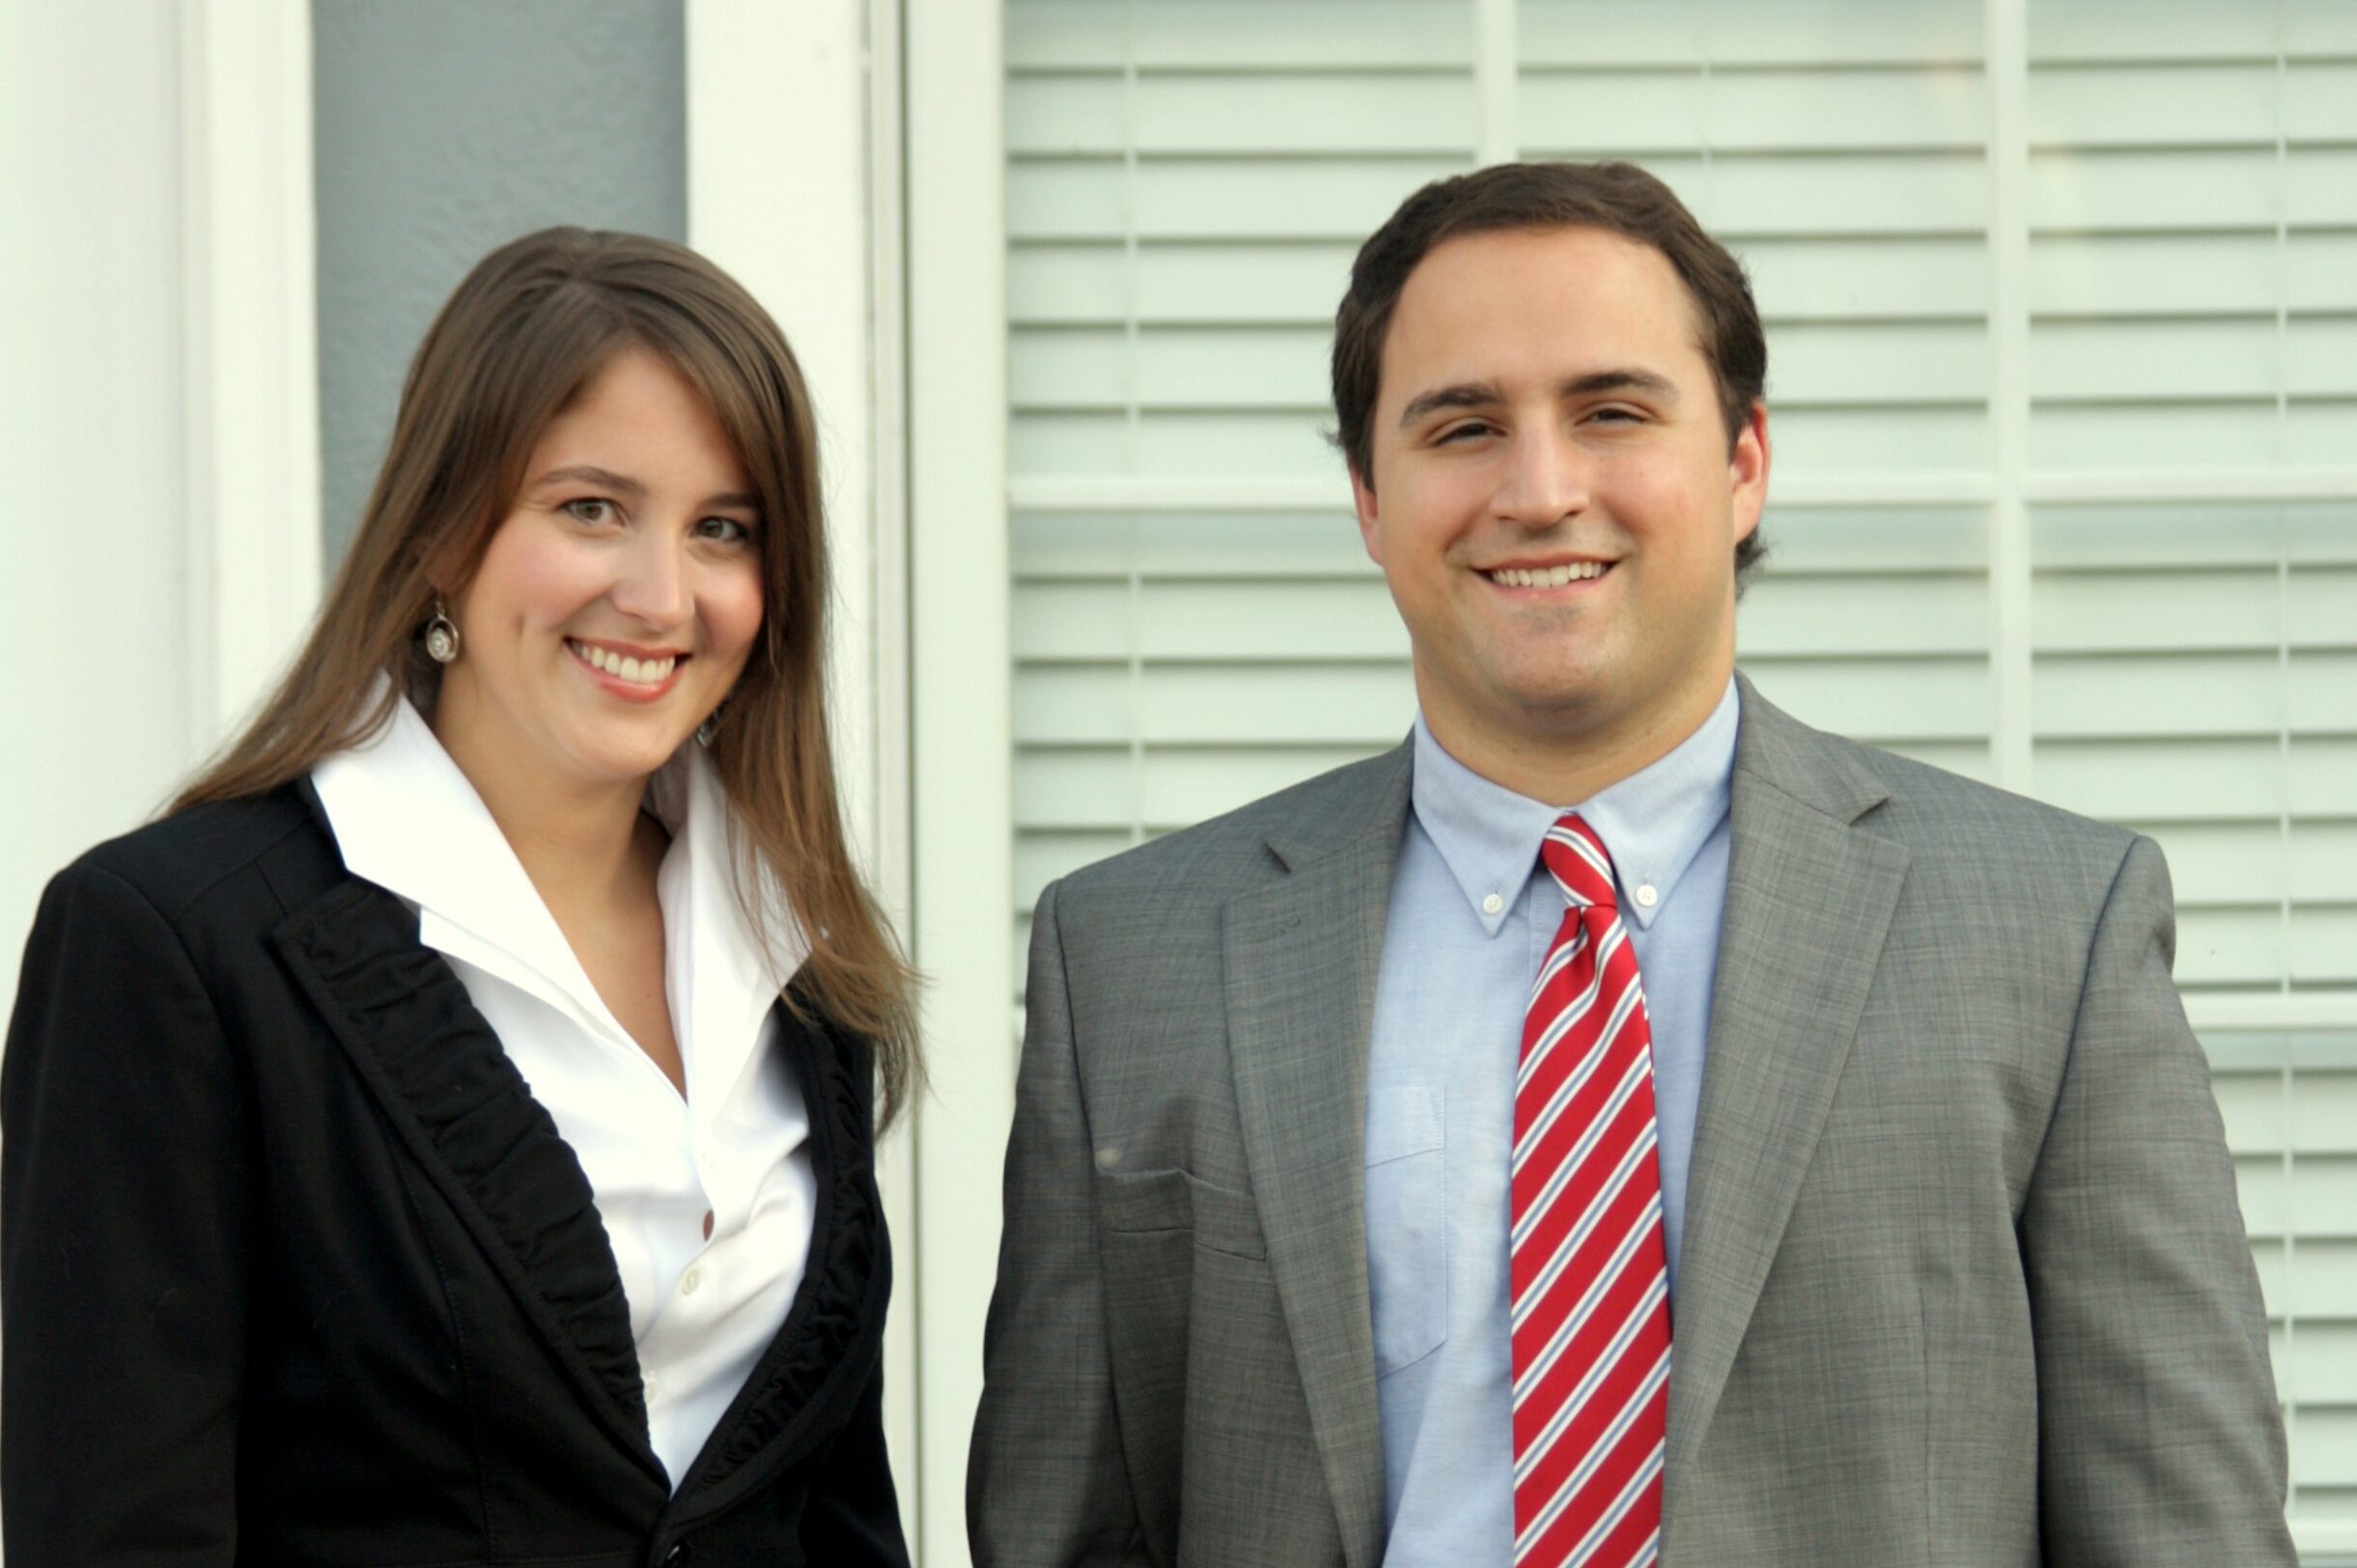 Alyssa and Adam (two attorneys at law with Baxley Maniscalco) are seen posing for a picture. Alyssa is wearing a white blouse with a black top, and Adam is wearing a grey blazer with a red and white tie and light blue shirt.